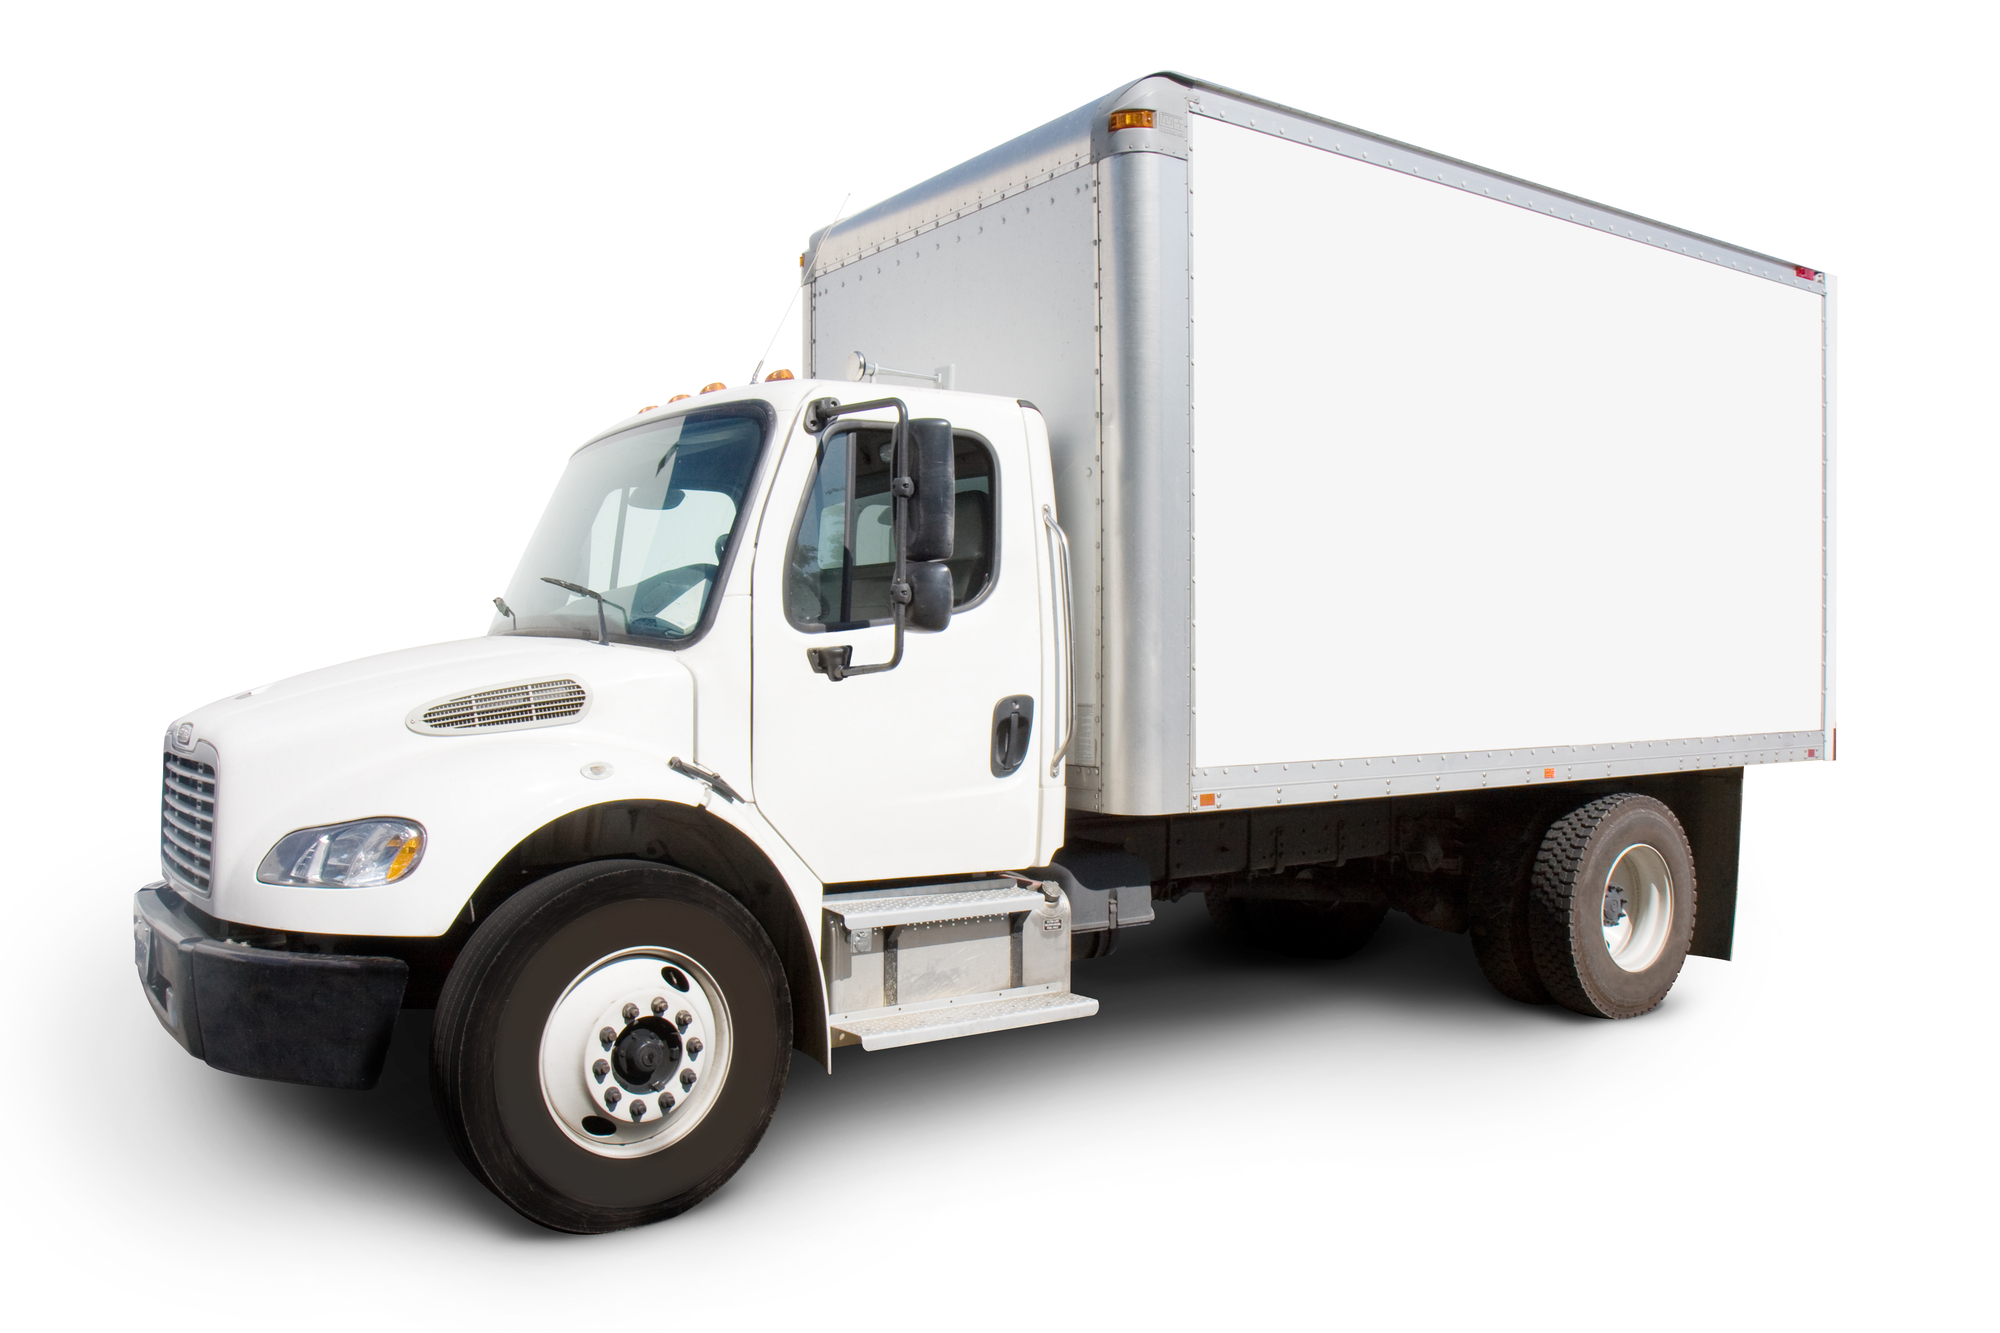 Plain white delivery truck with sides ready for custom text and logos